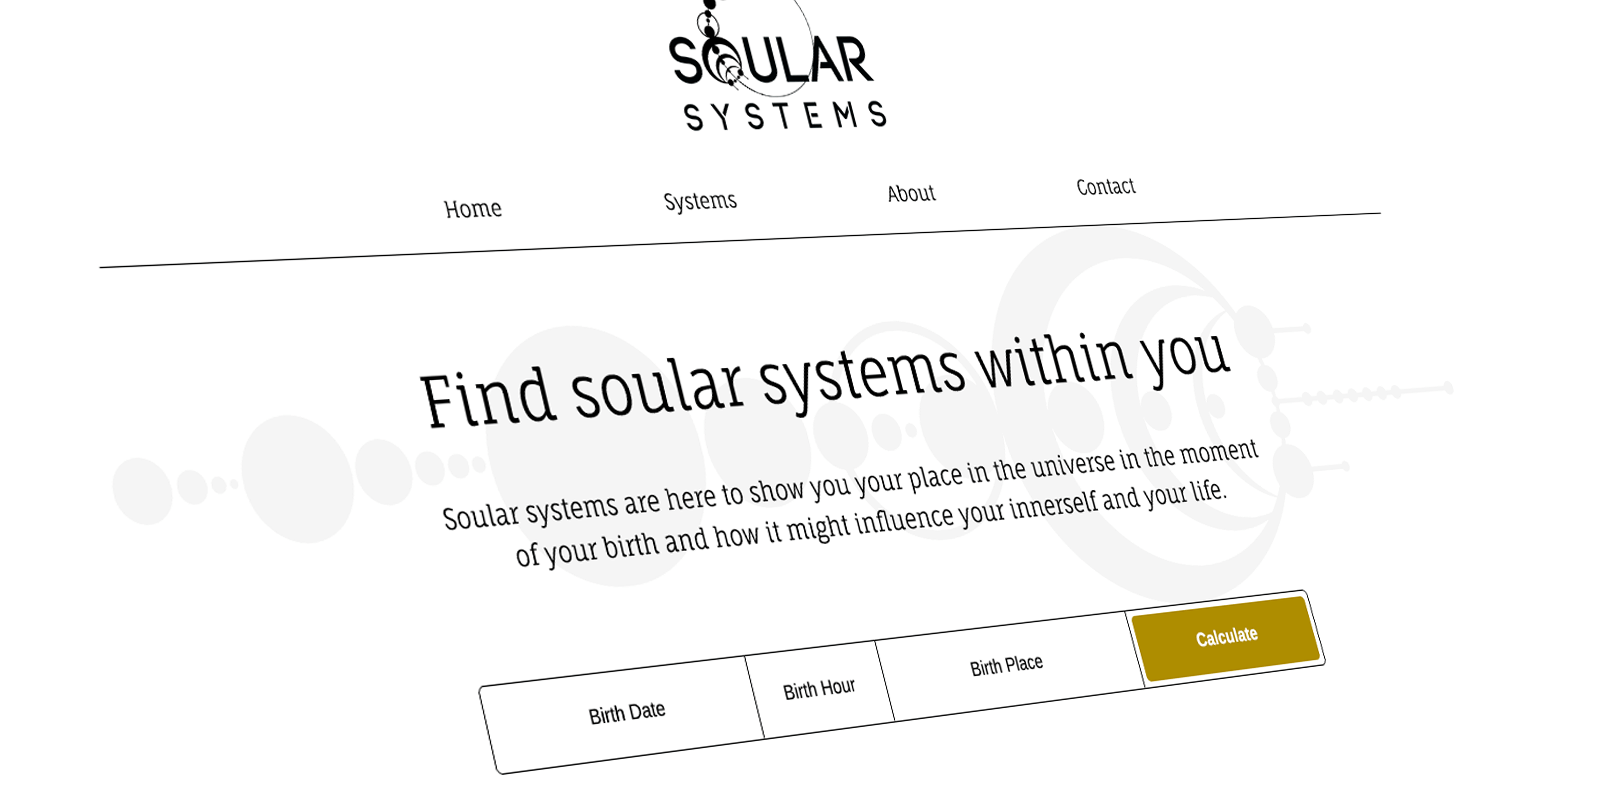 Soular Systems Image 1